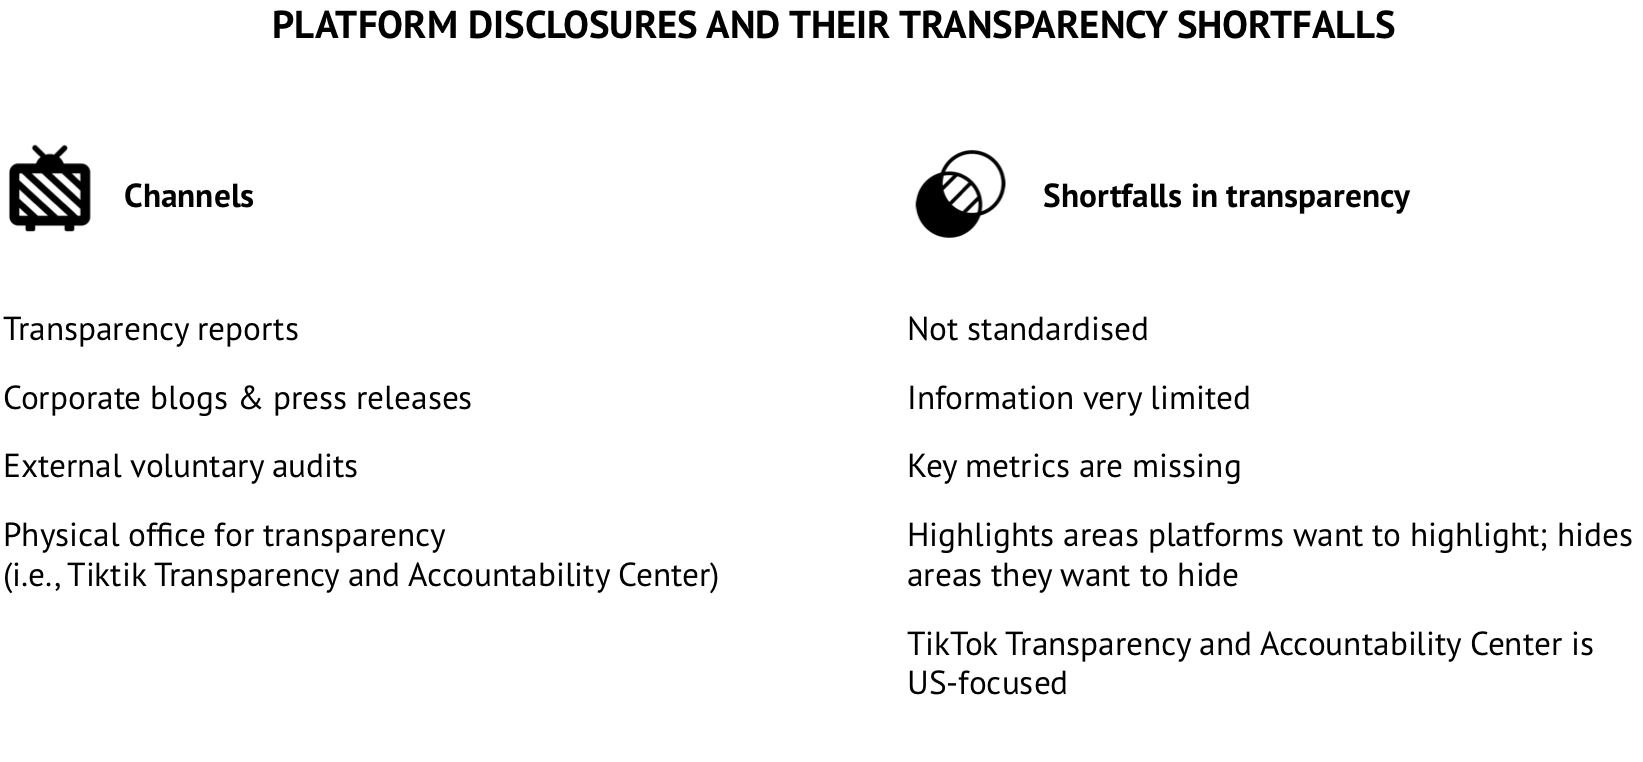 An overview visualising the platform disclosures and their transparency shortfalls.